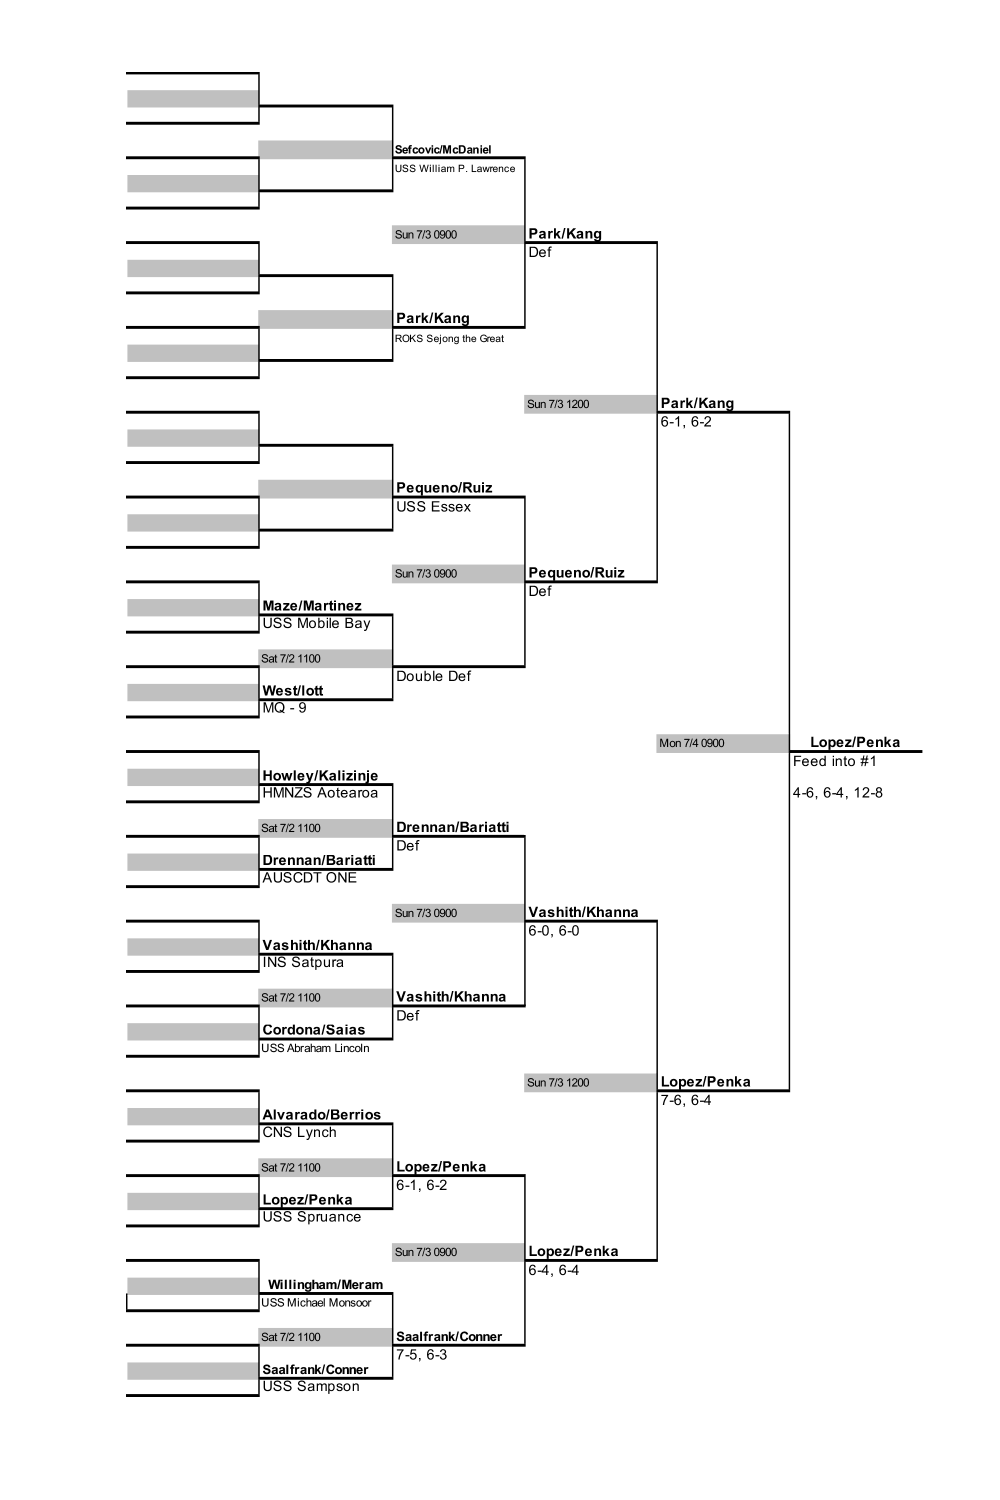 Doubles Tennis Bracket Results 1